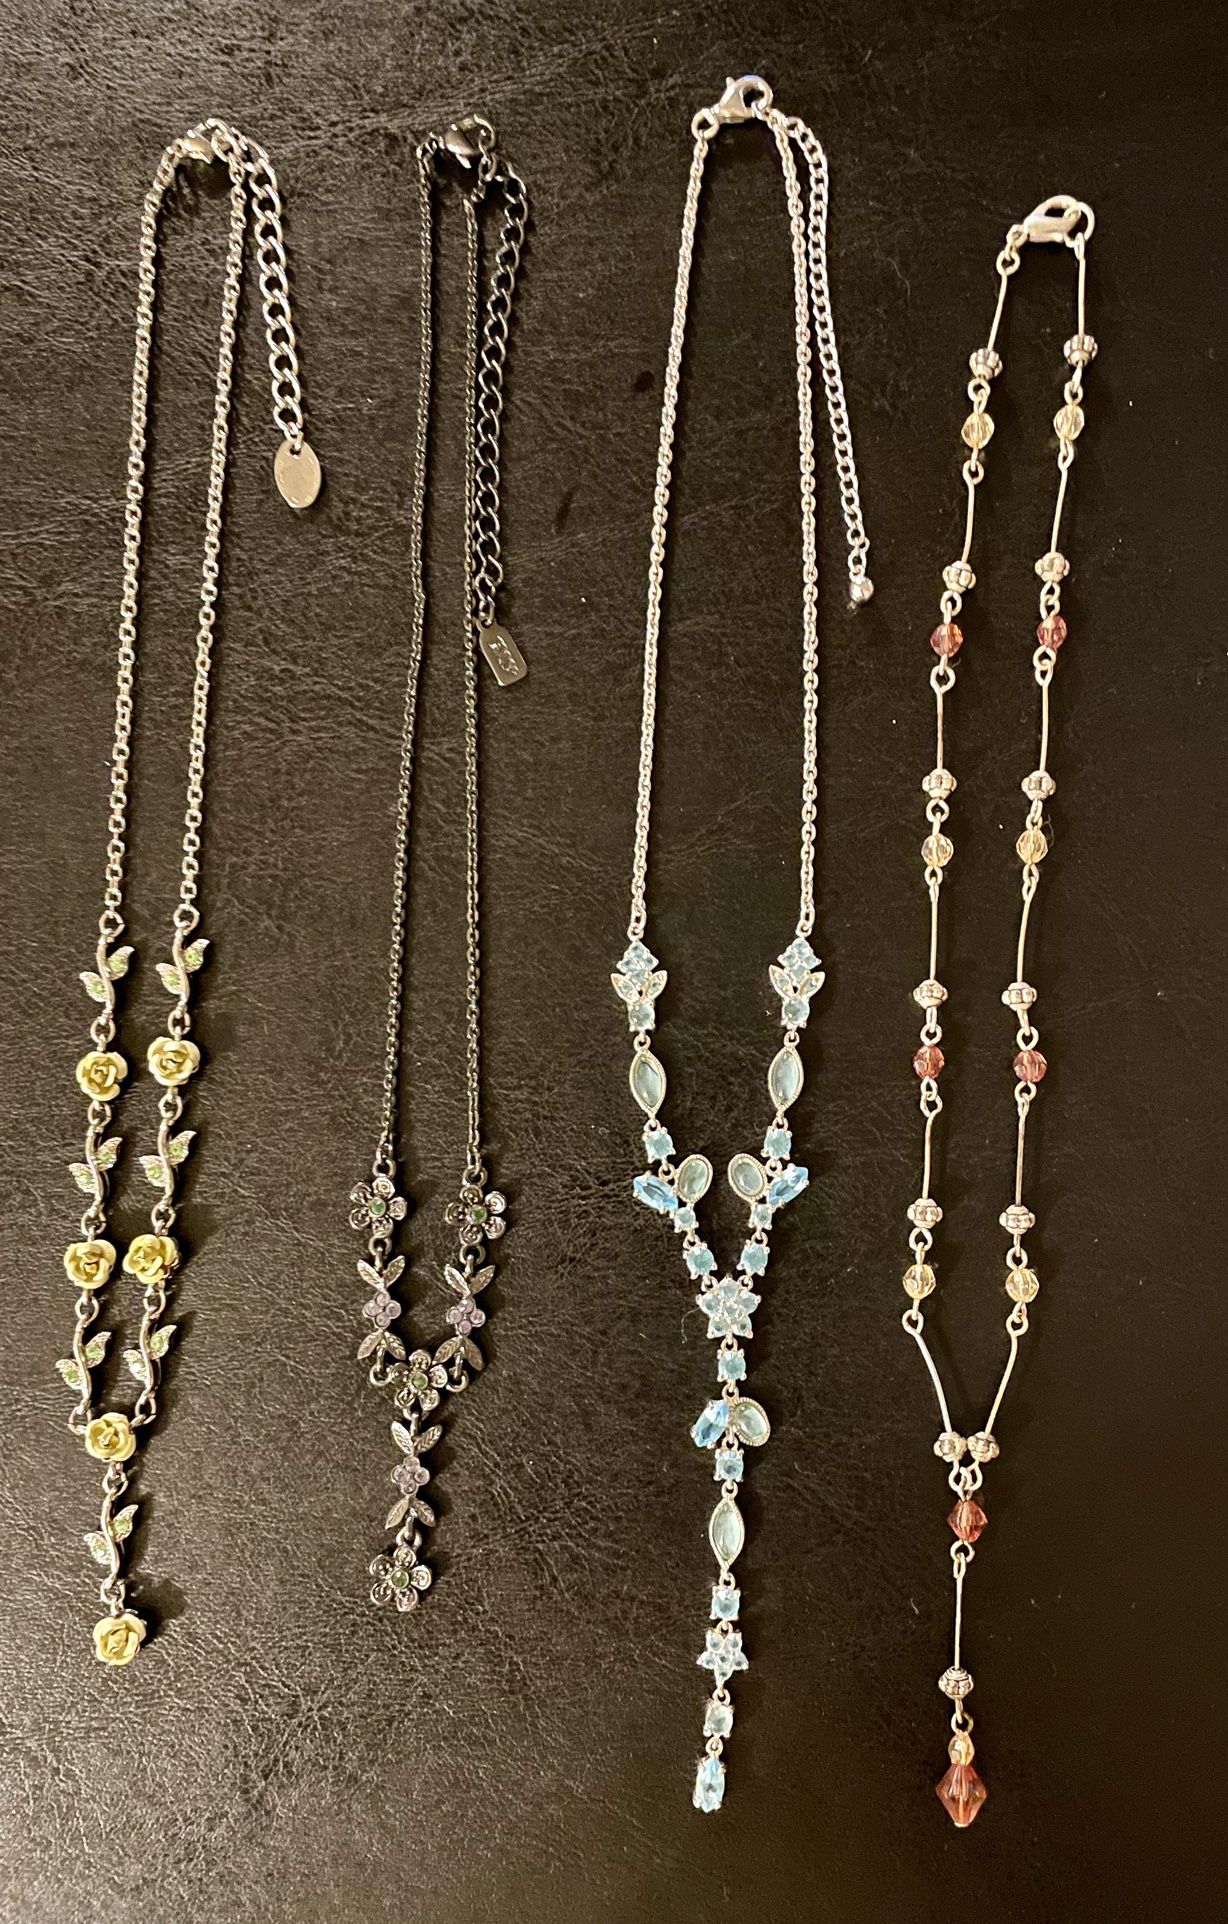 Necklaces. 4 For $8